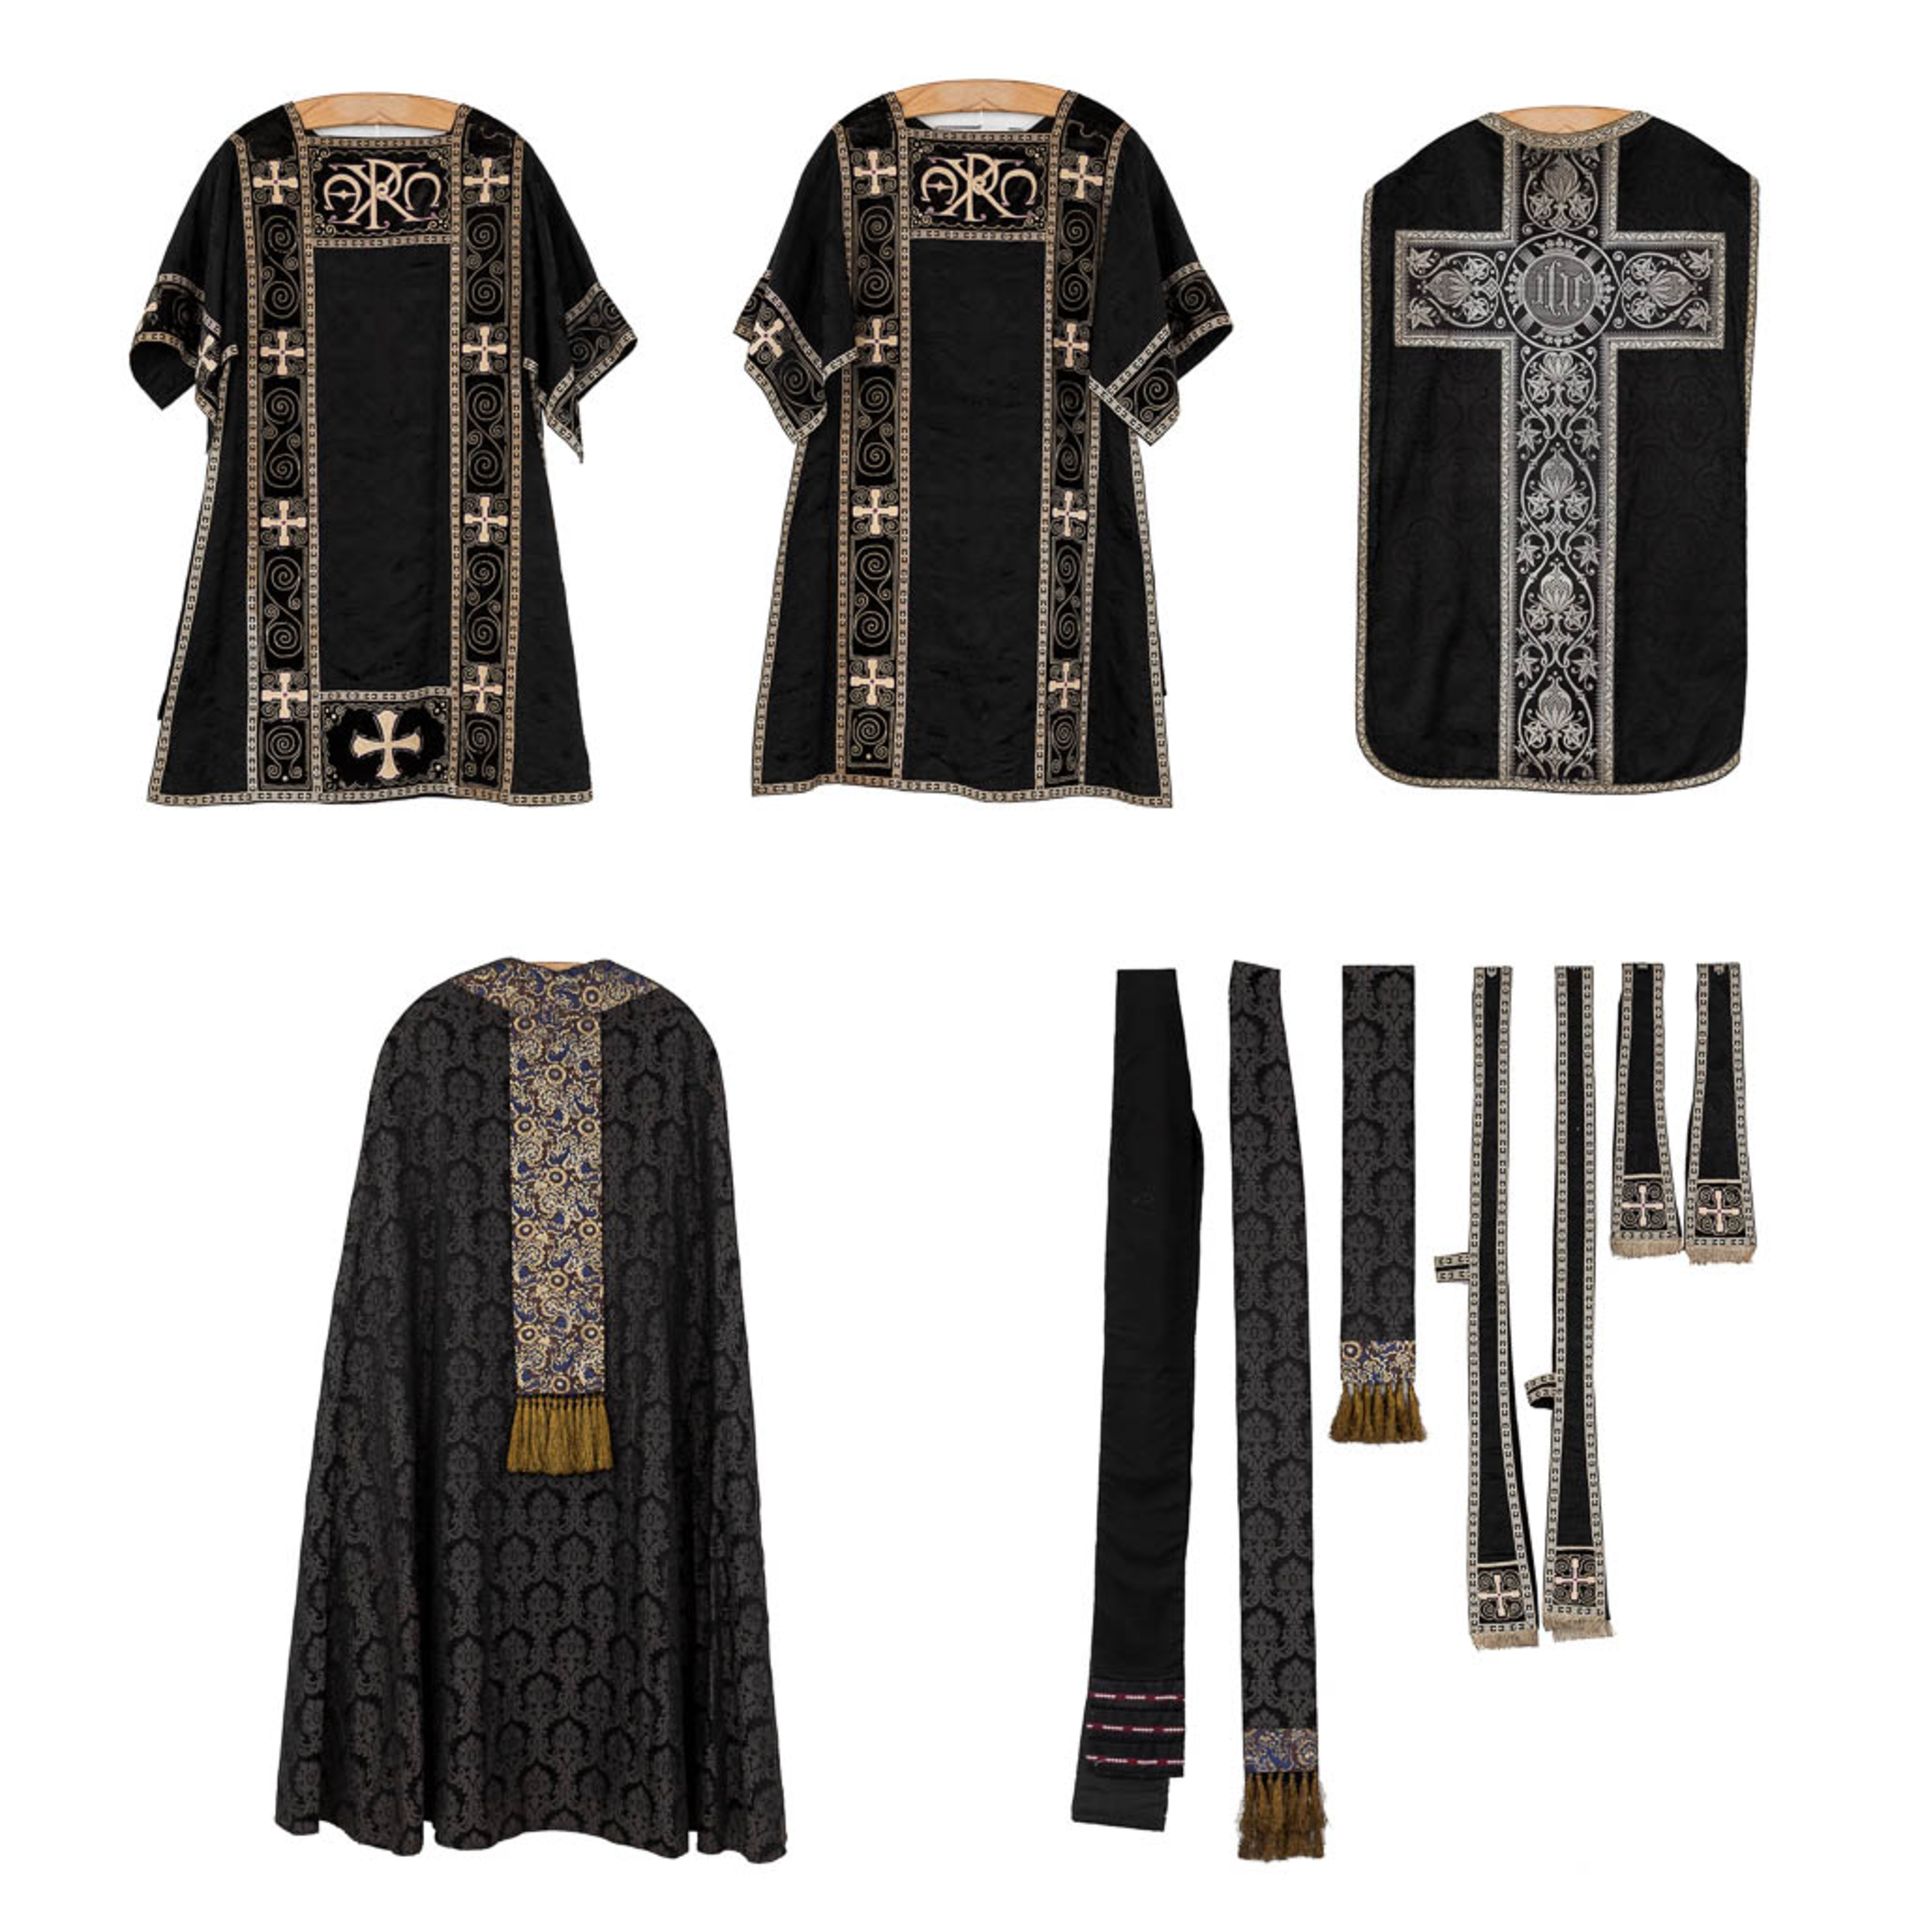 A Roman Chasuble, Two Dalmatics and a Cope. Black textile with embroideries.